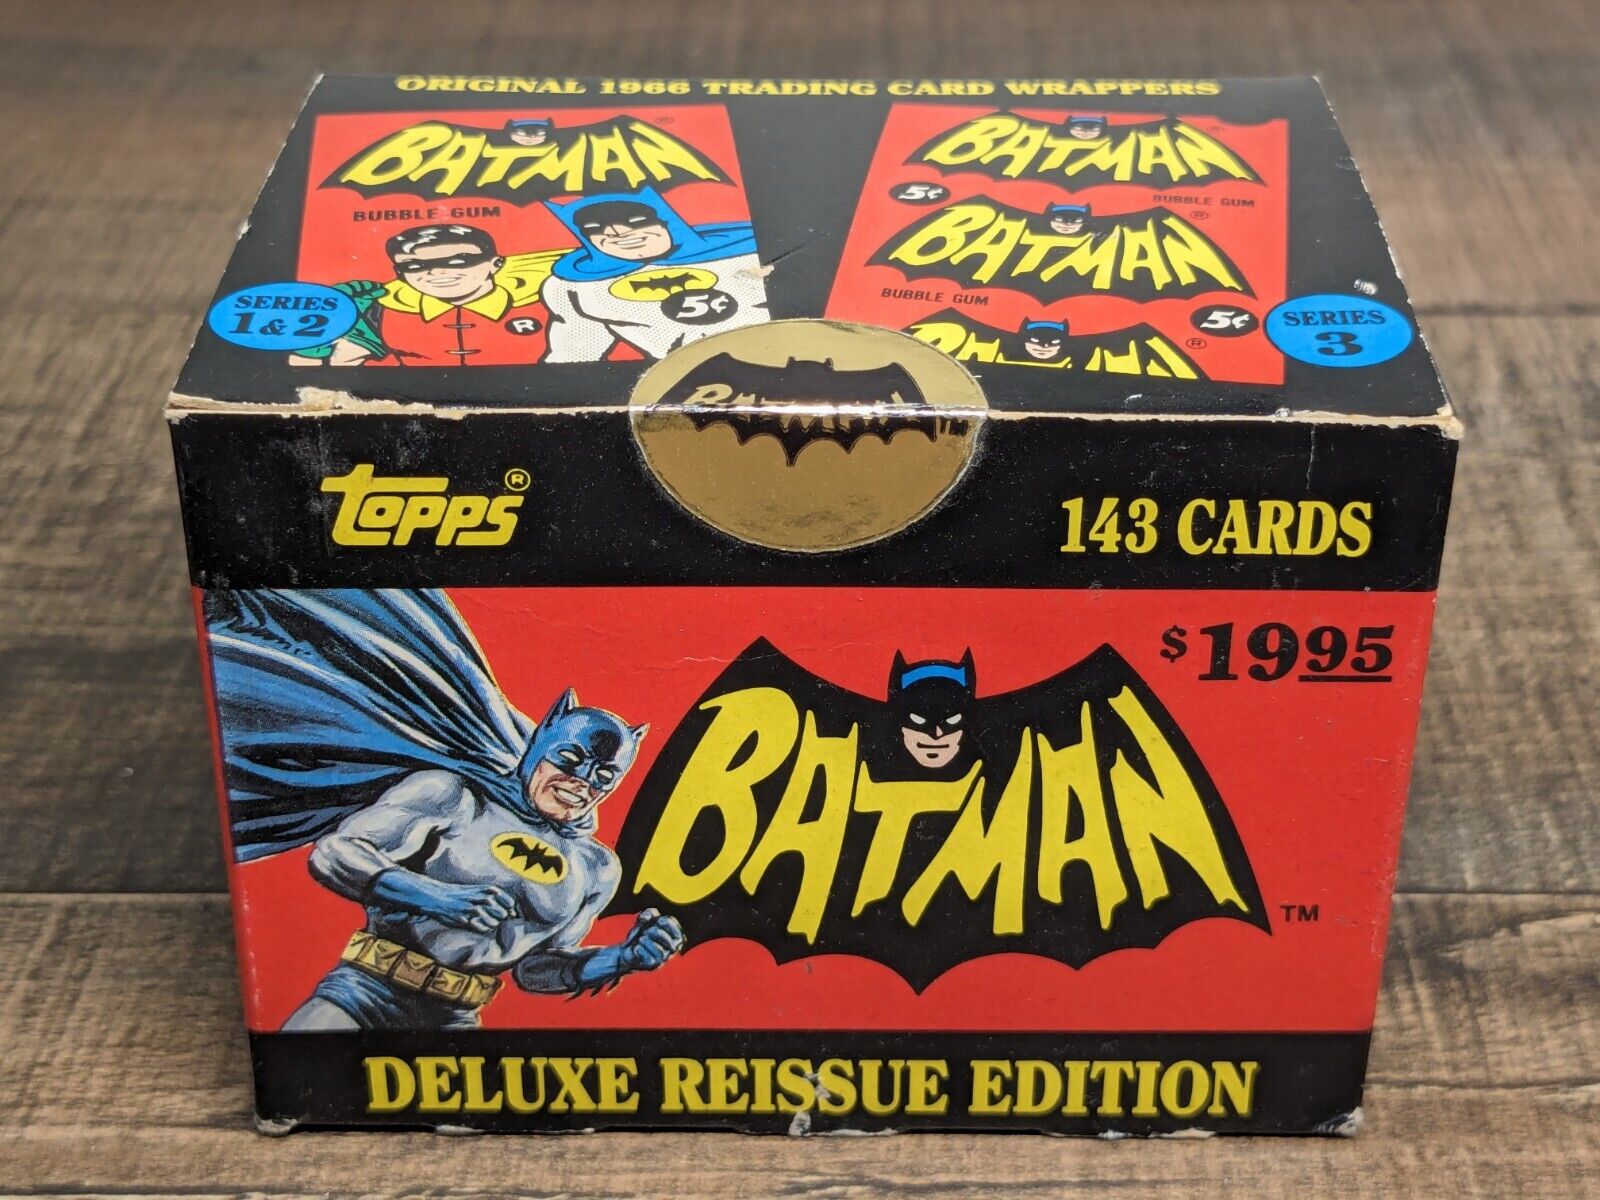 Original 1966 Trading Card Batman Topps 143 Cards Box Deluxe Reissue 1989 WOW